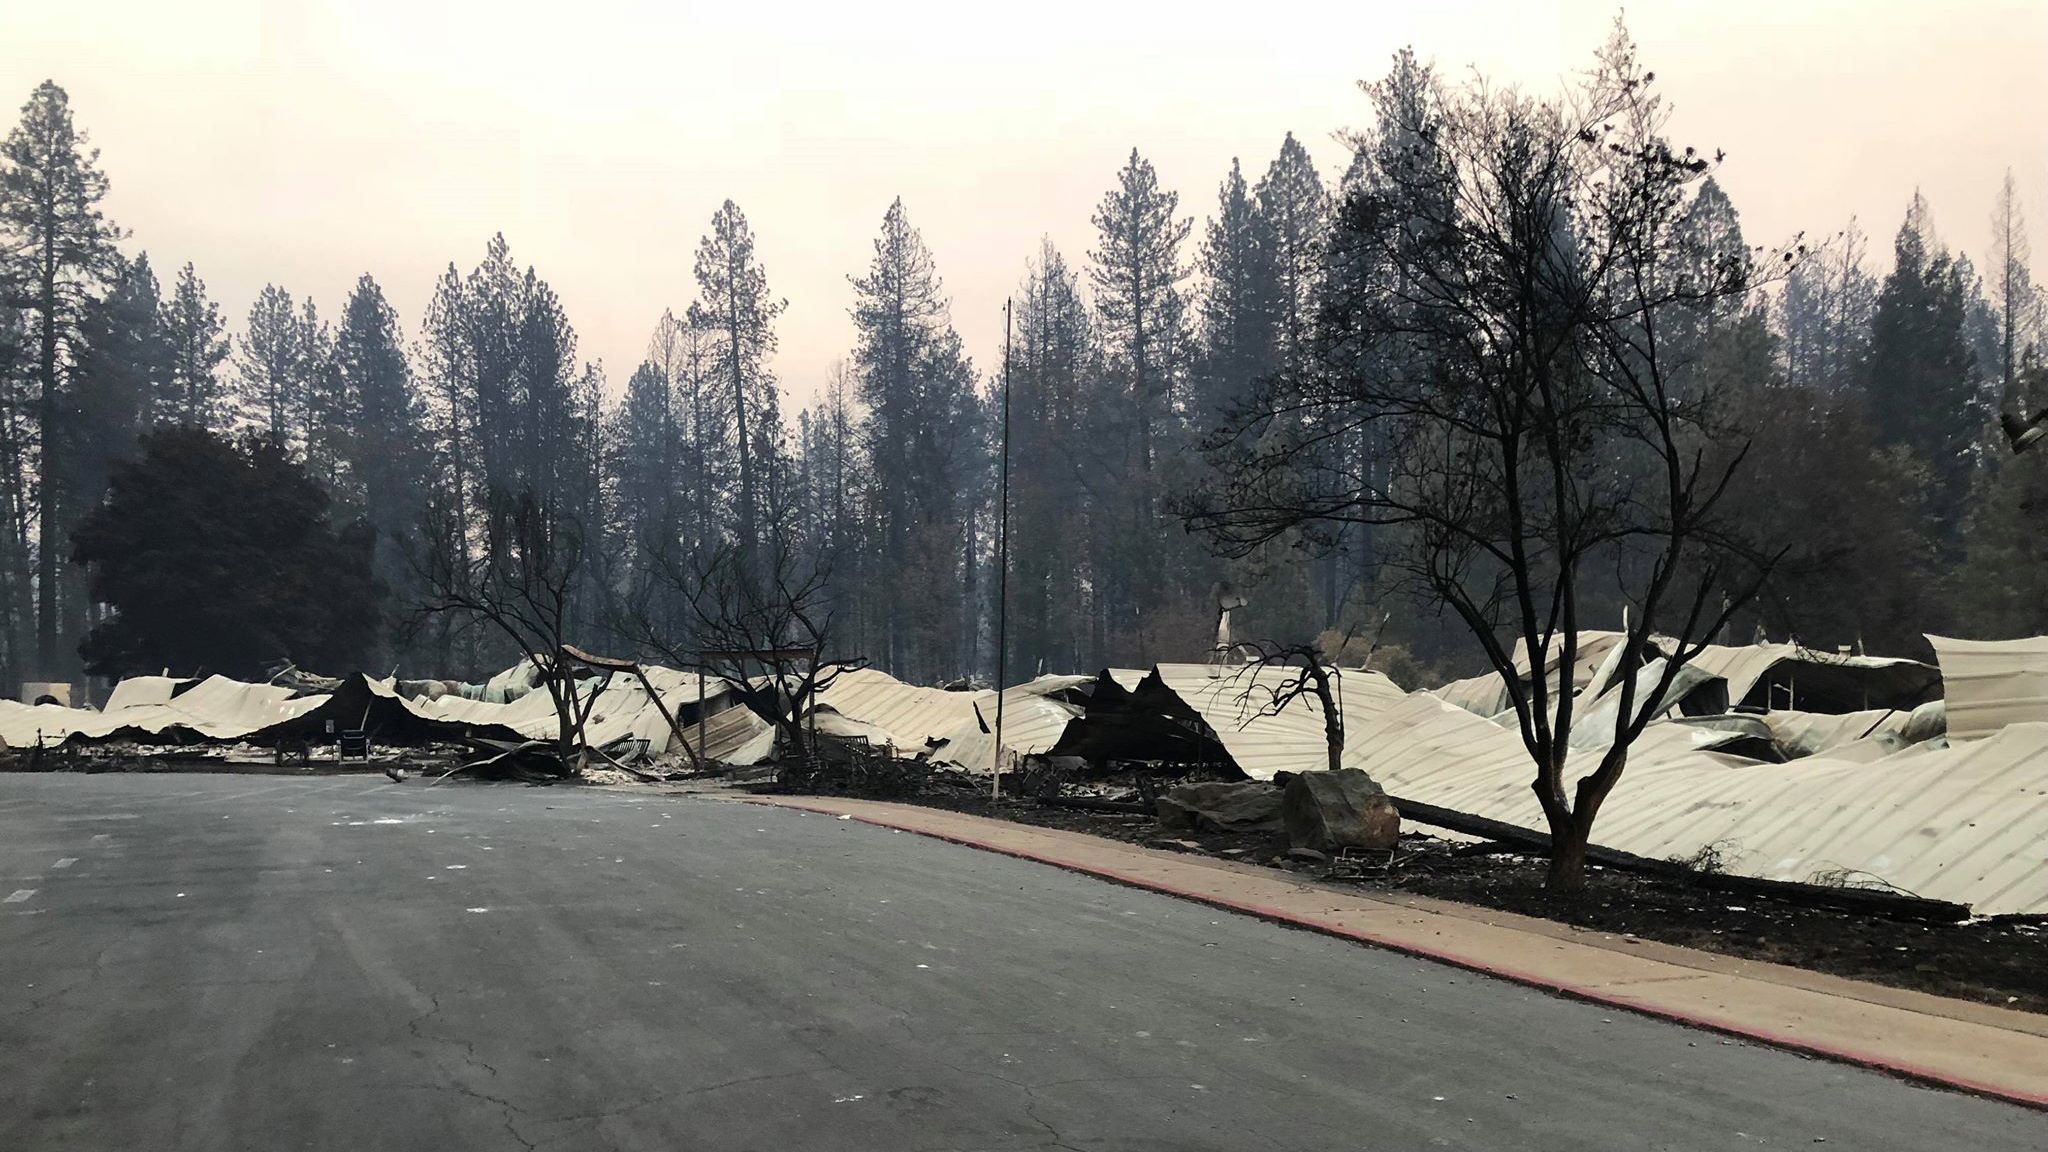 https://media.cnn.com/api/v1/images/stellar/prod/181113135029-11-before-and-after-images-paradise-california-cypress-meadows.jpg?q=w_2048,h_1152,x_0,y_0,c_fill